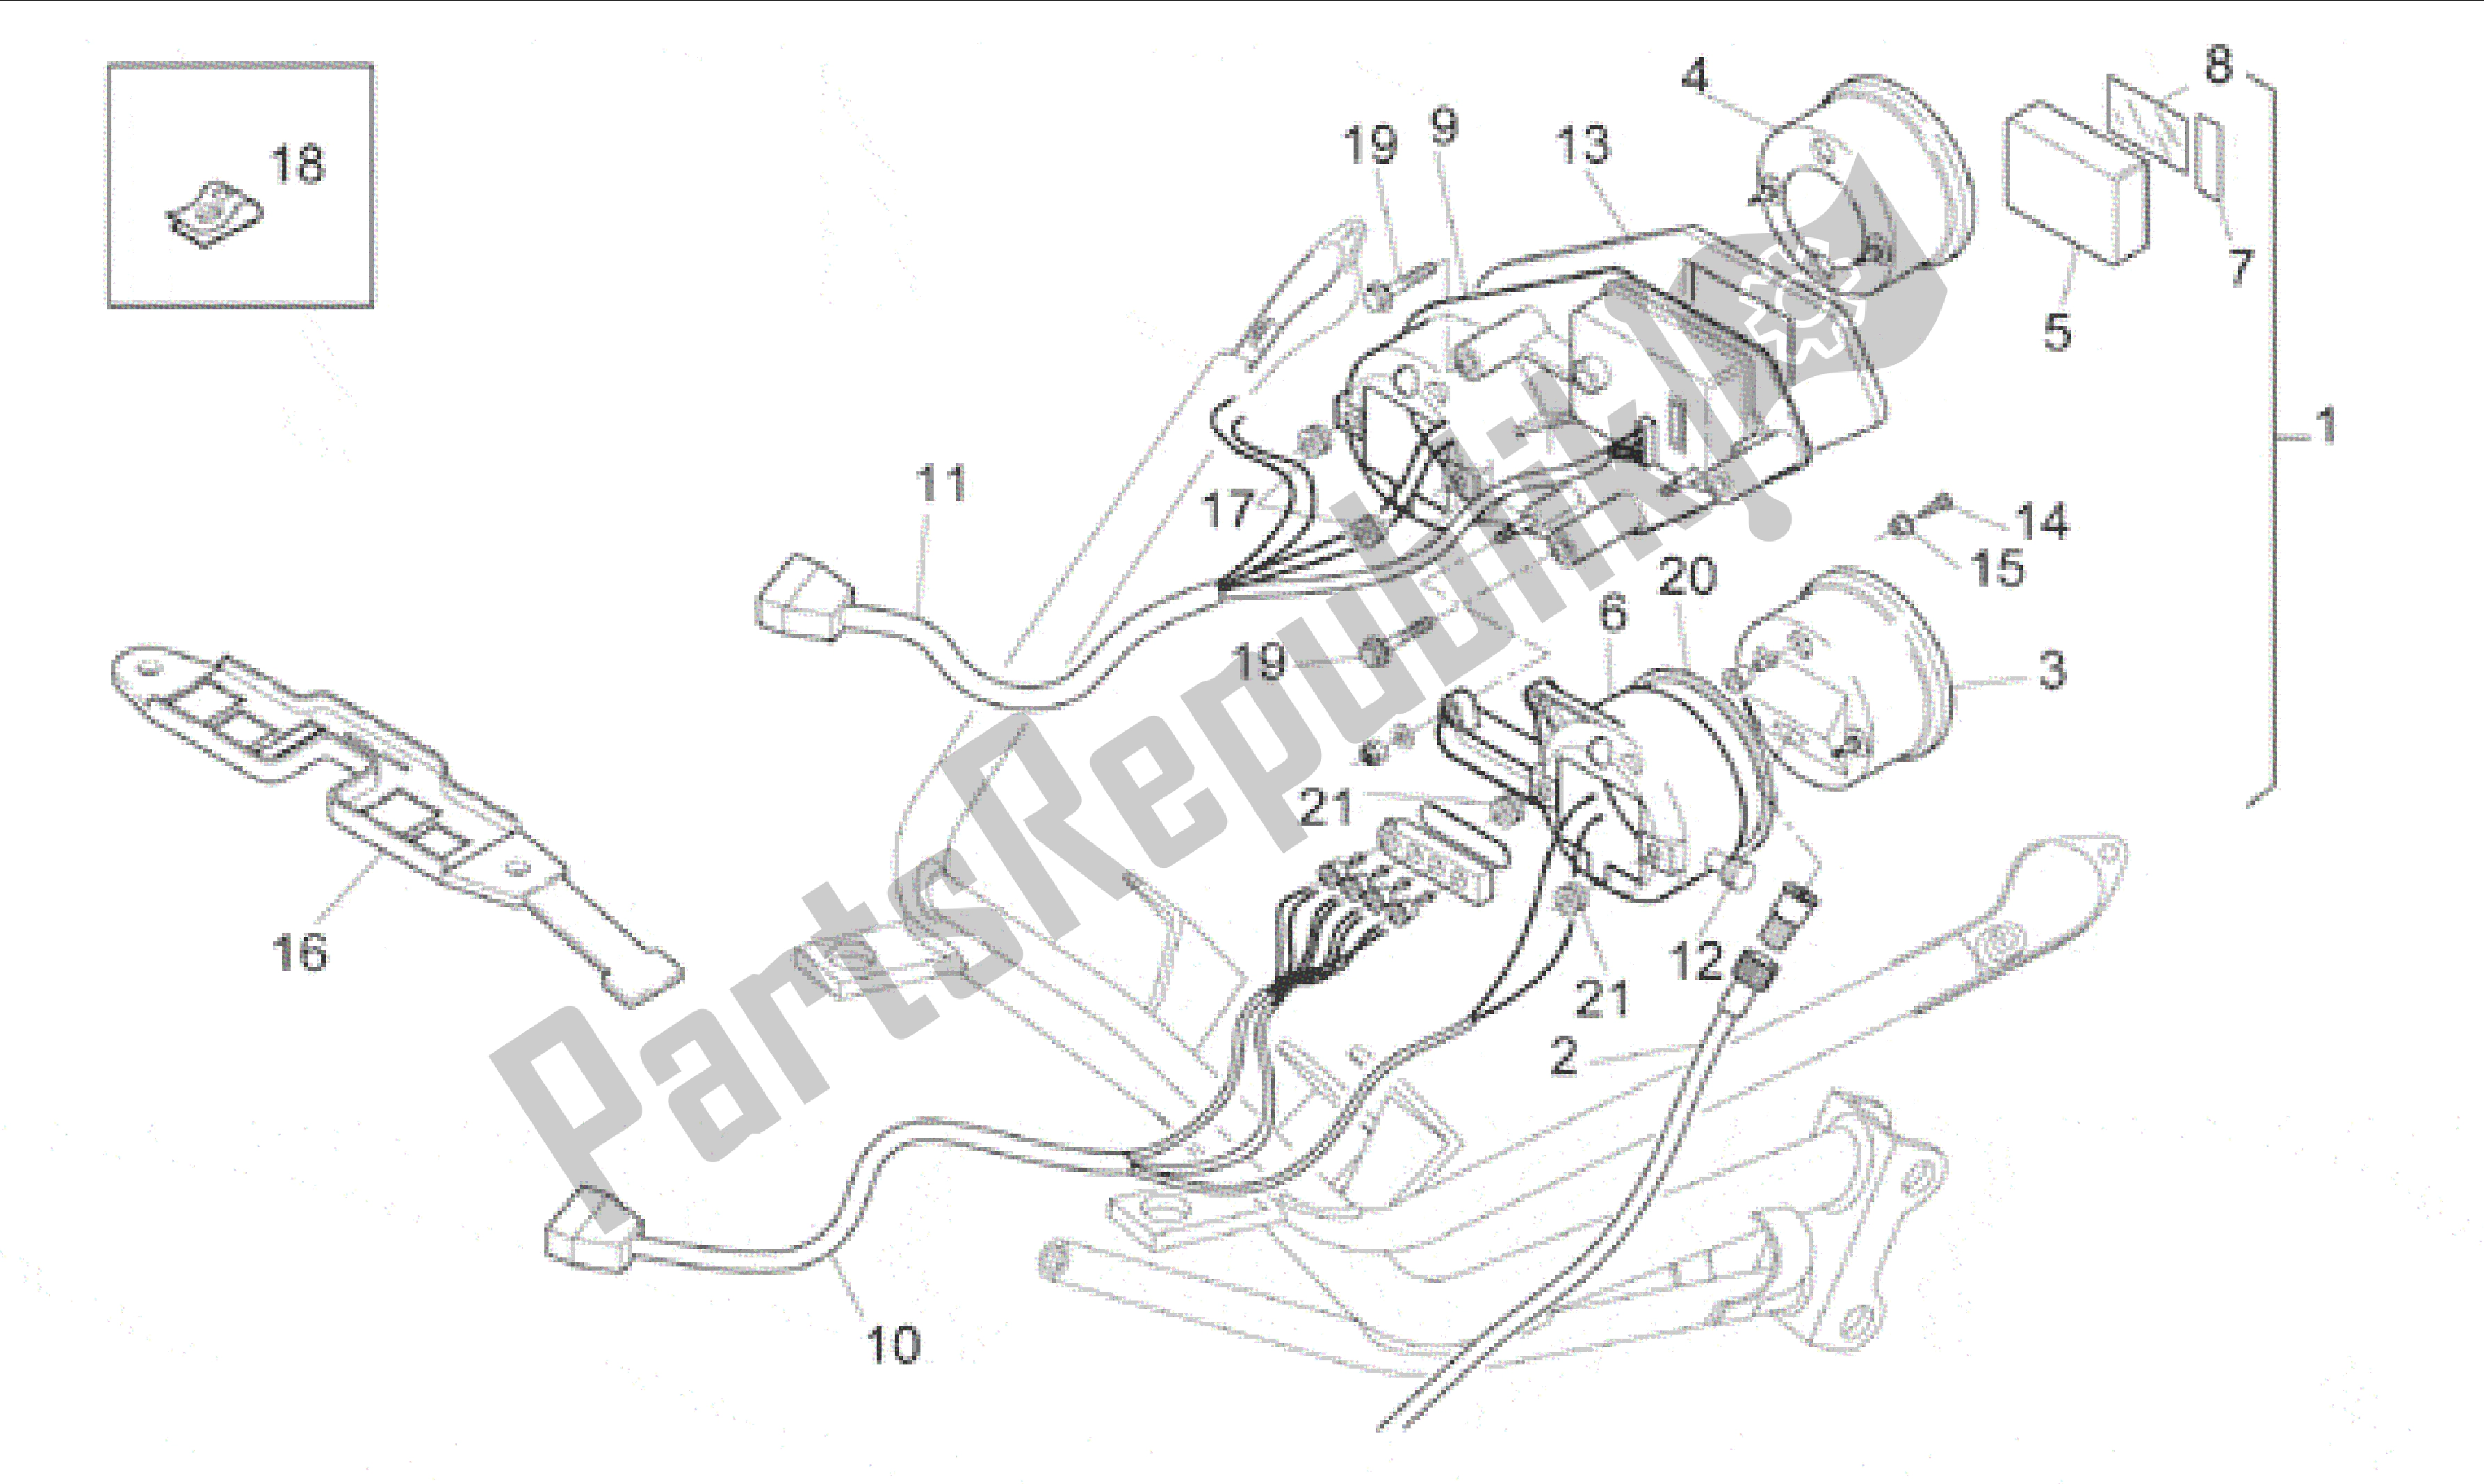 All parts for the Dashboard of the Aprilia RS 250 1995 - 1997